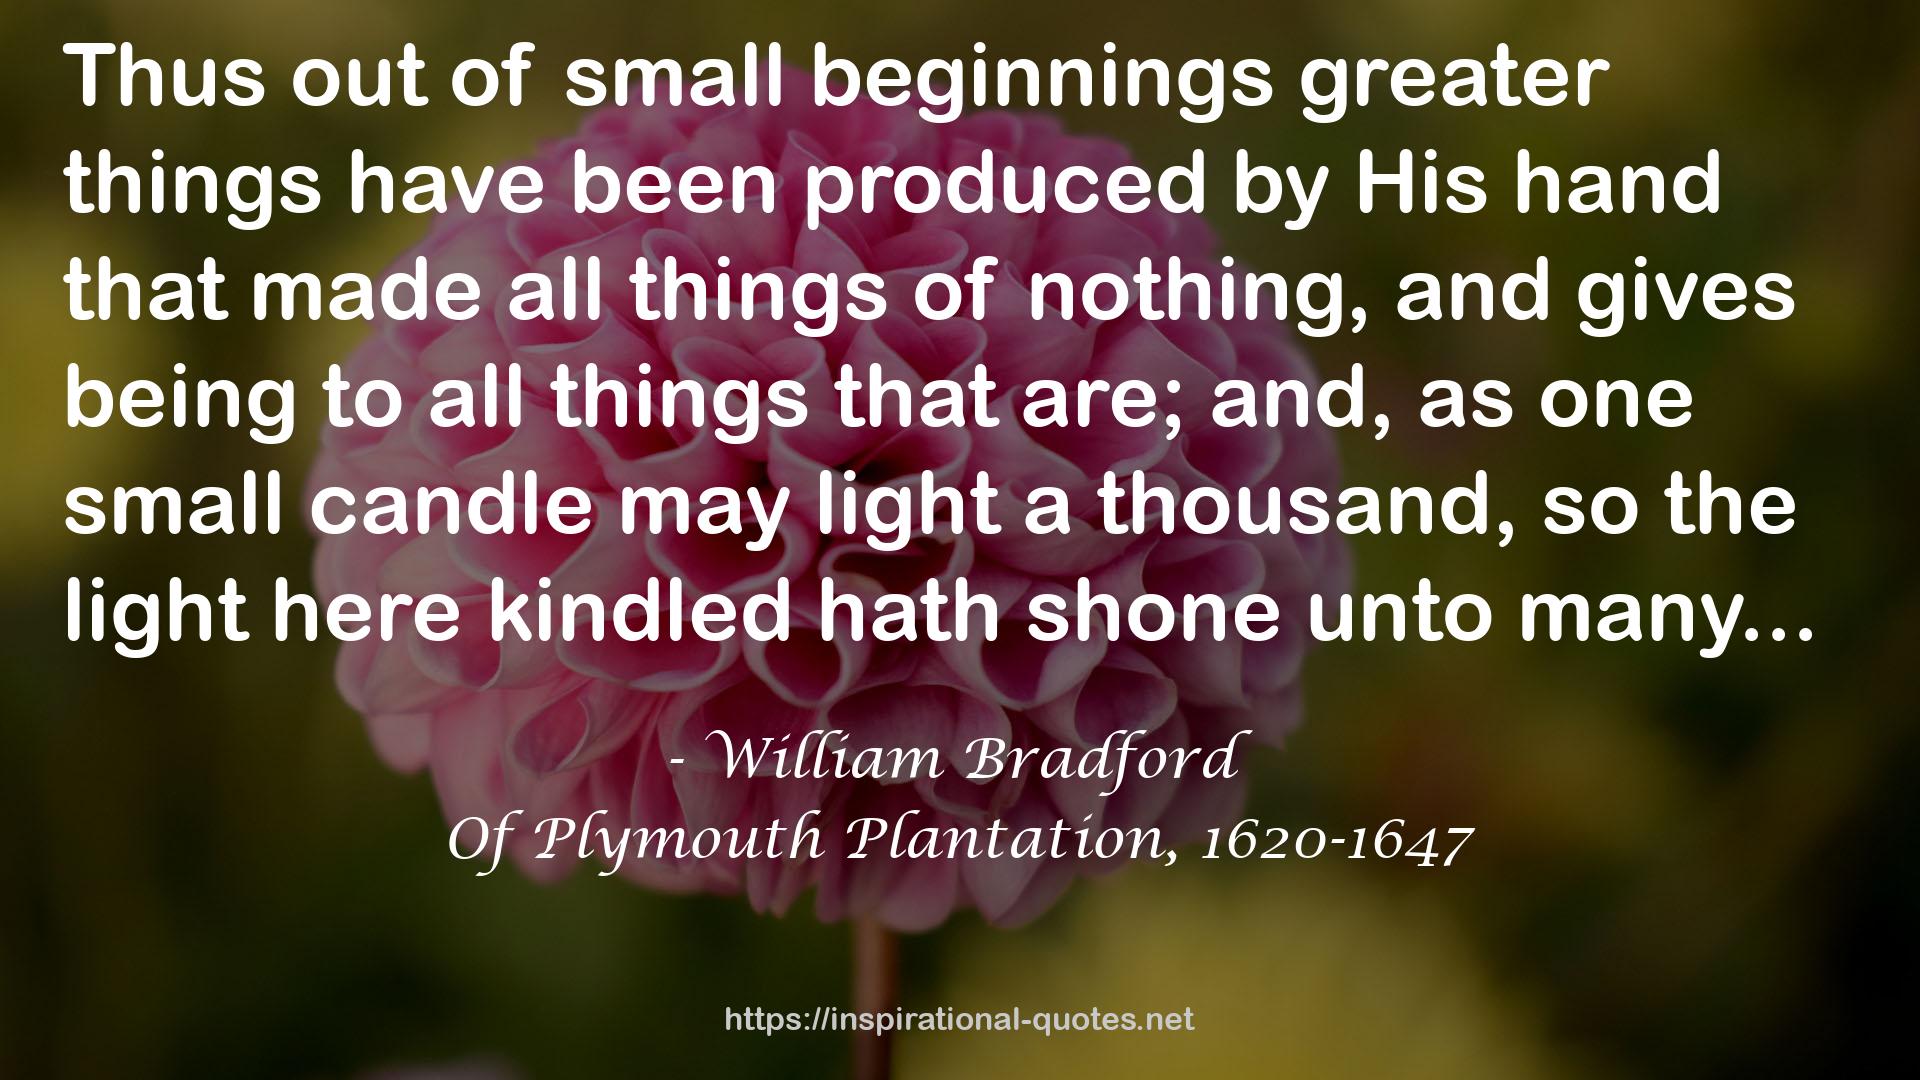 Of Plymouth Plantation, 1620-1647 QUOTES